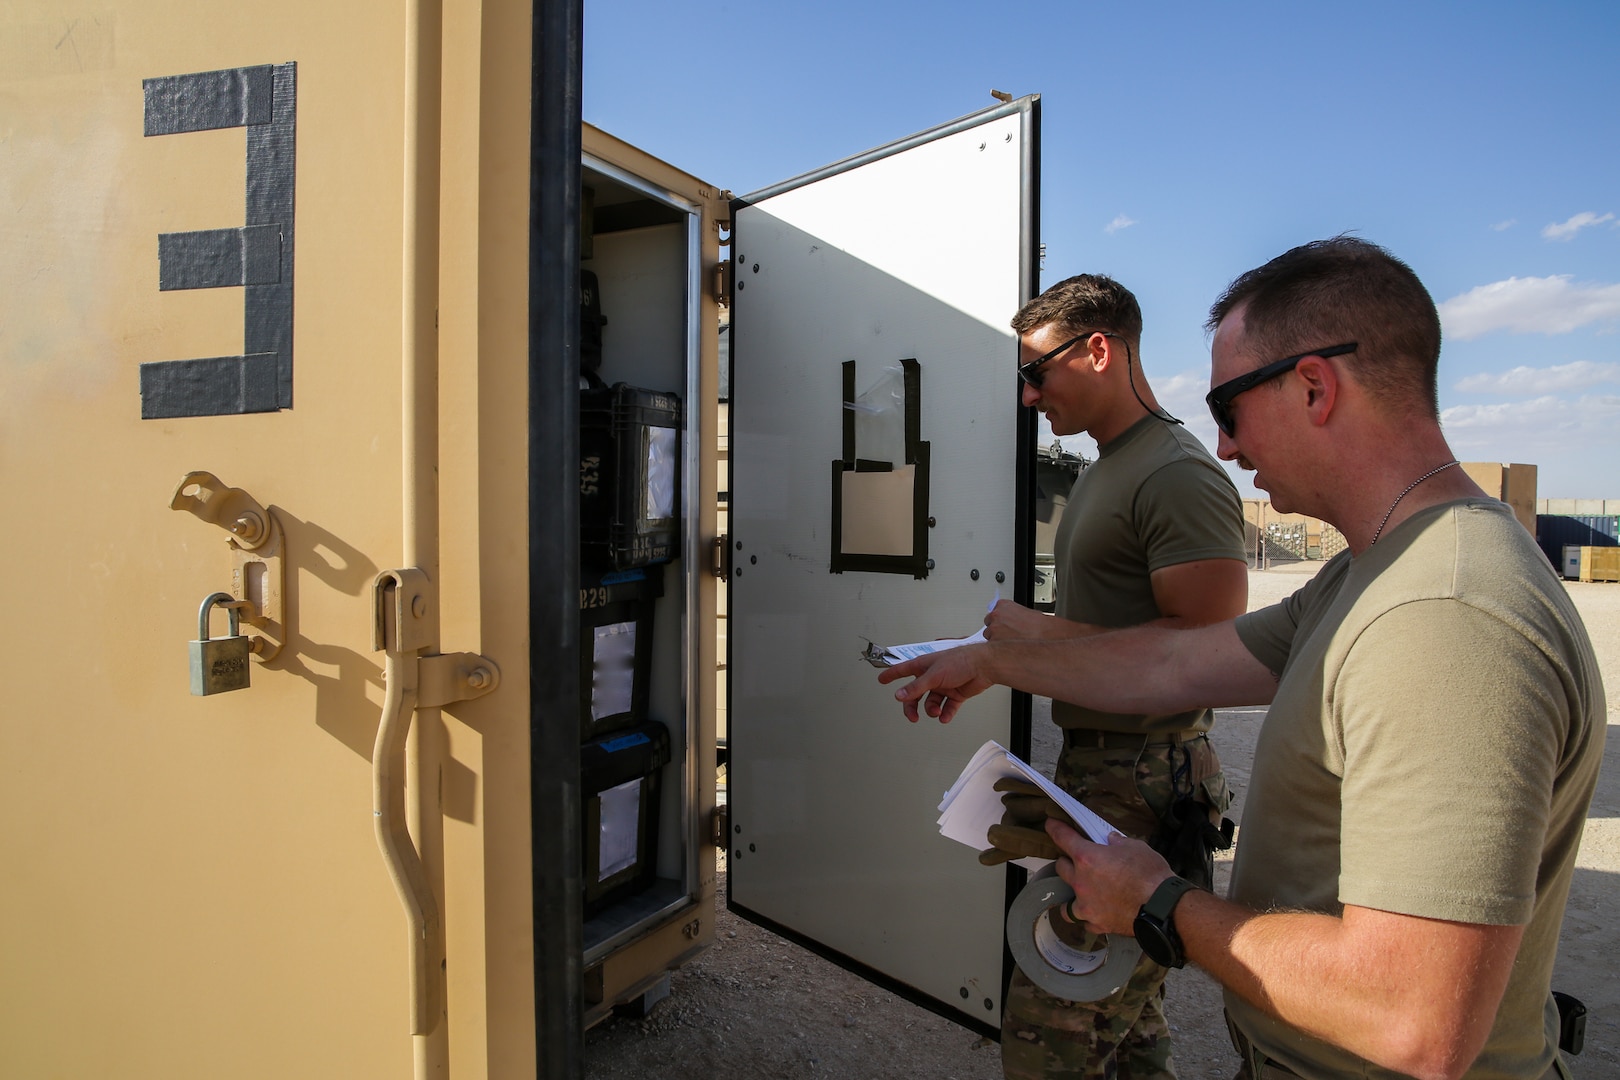 U.S. Air Force Airmen conduct an inventory of combat-related tactical equipment before being transitioned out of theater at Al Asad Air Base on October 19, 2021. As equipment exits theater, Combined Joint Task Force-Operation Inherent Resolve remains ready and capable to deter threats while transitioning to an advise, assist and enable role in order to allow the continued defeat of Daesh. (U.S. Army photp by Spc. Clara Soria-Hernandez)